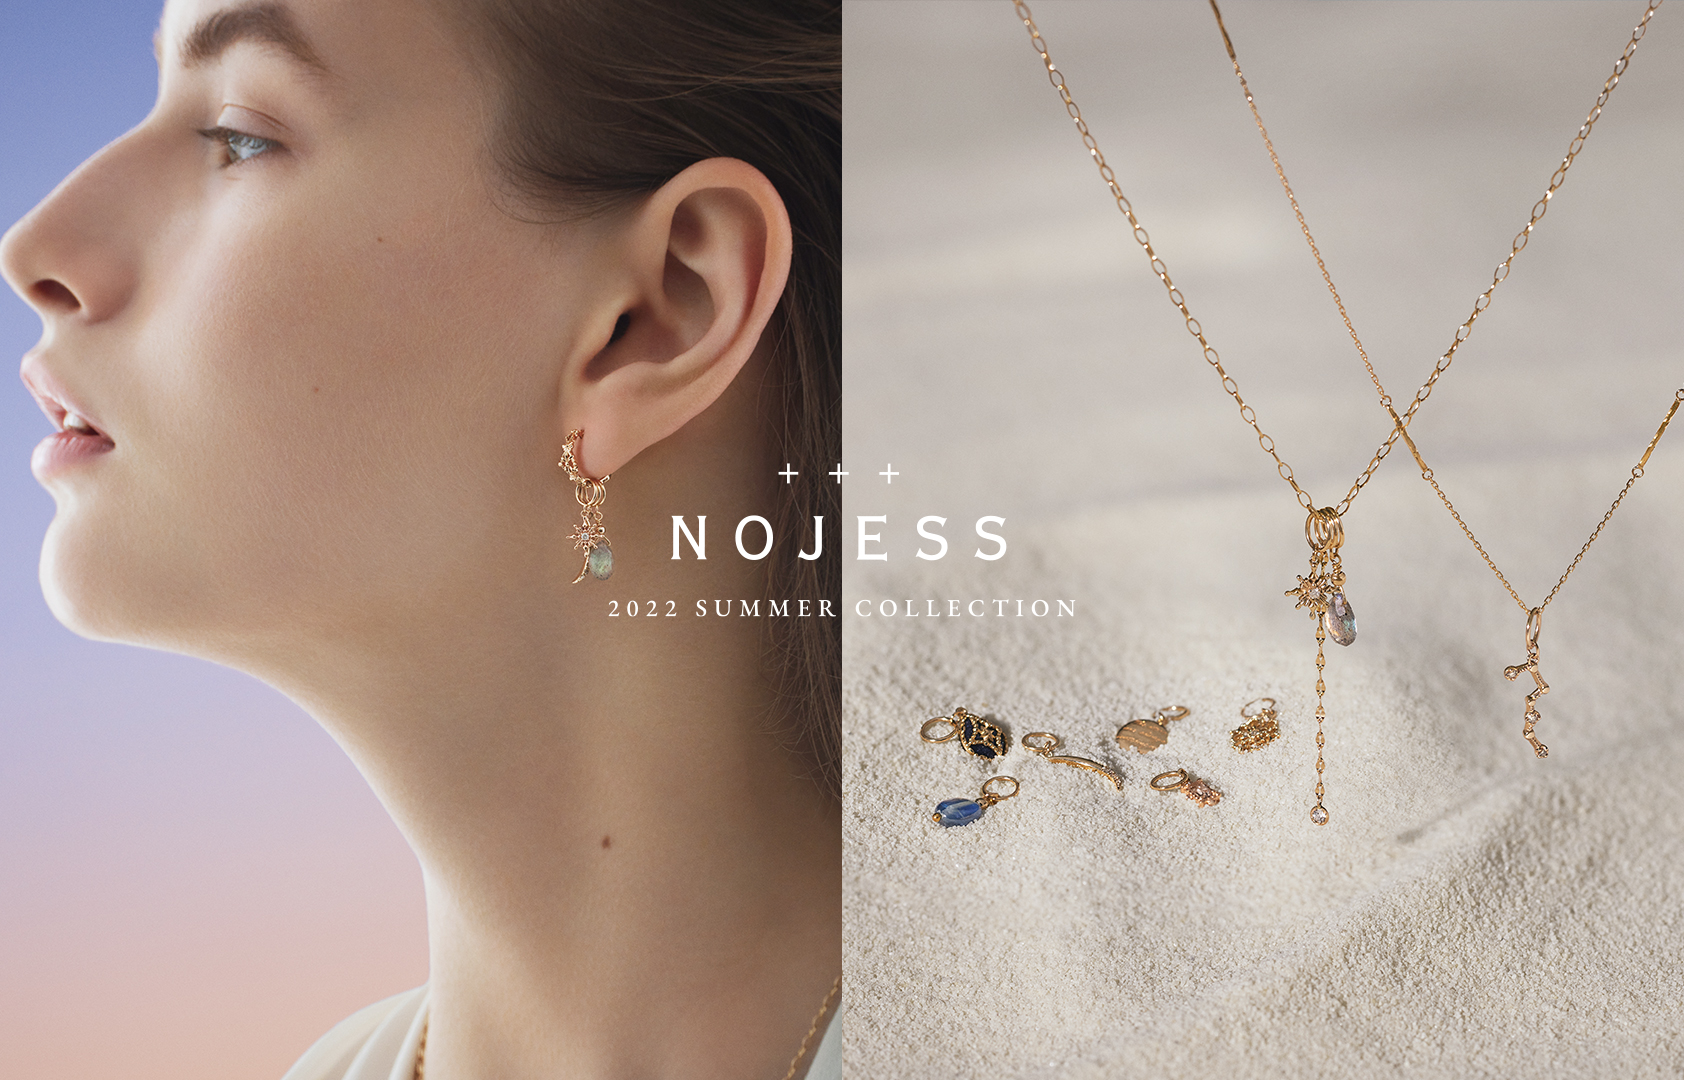 NOJESS 2022 Summer Collection